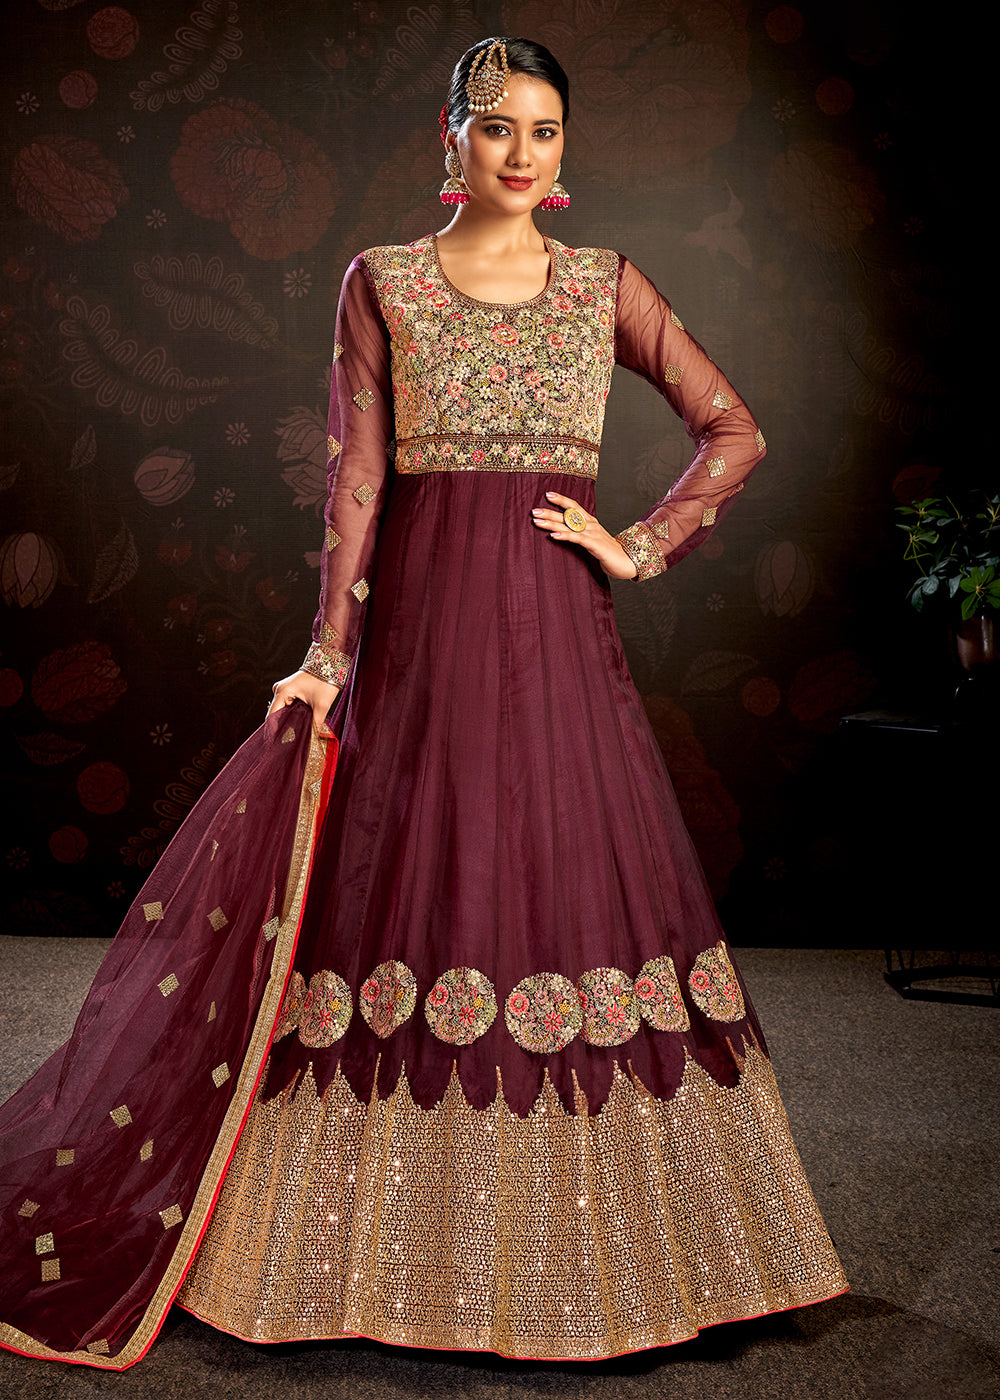 Buy Now Maroon Sparkly Net Embroidered Designer Anarkali Suit Online in USA, UK, Australia, New Zealand, Canada & Worldwide at Empress Clothing. 